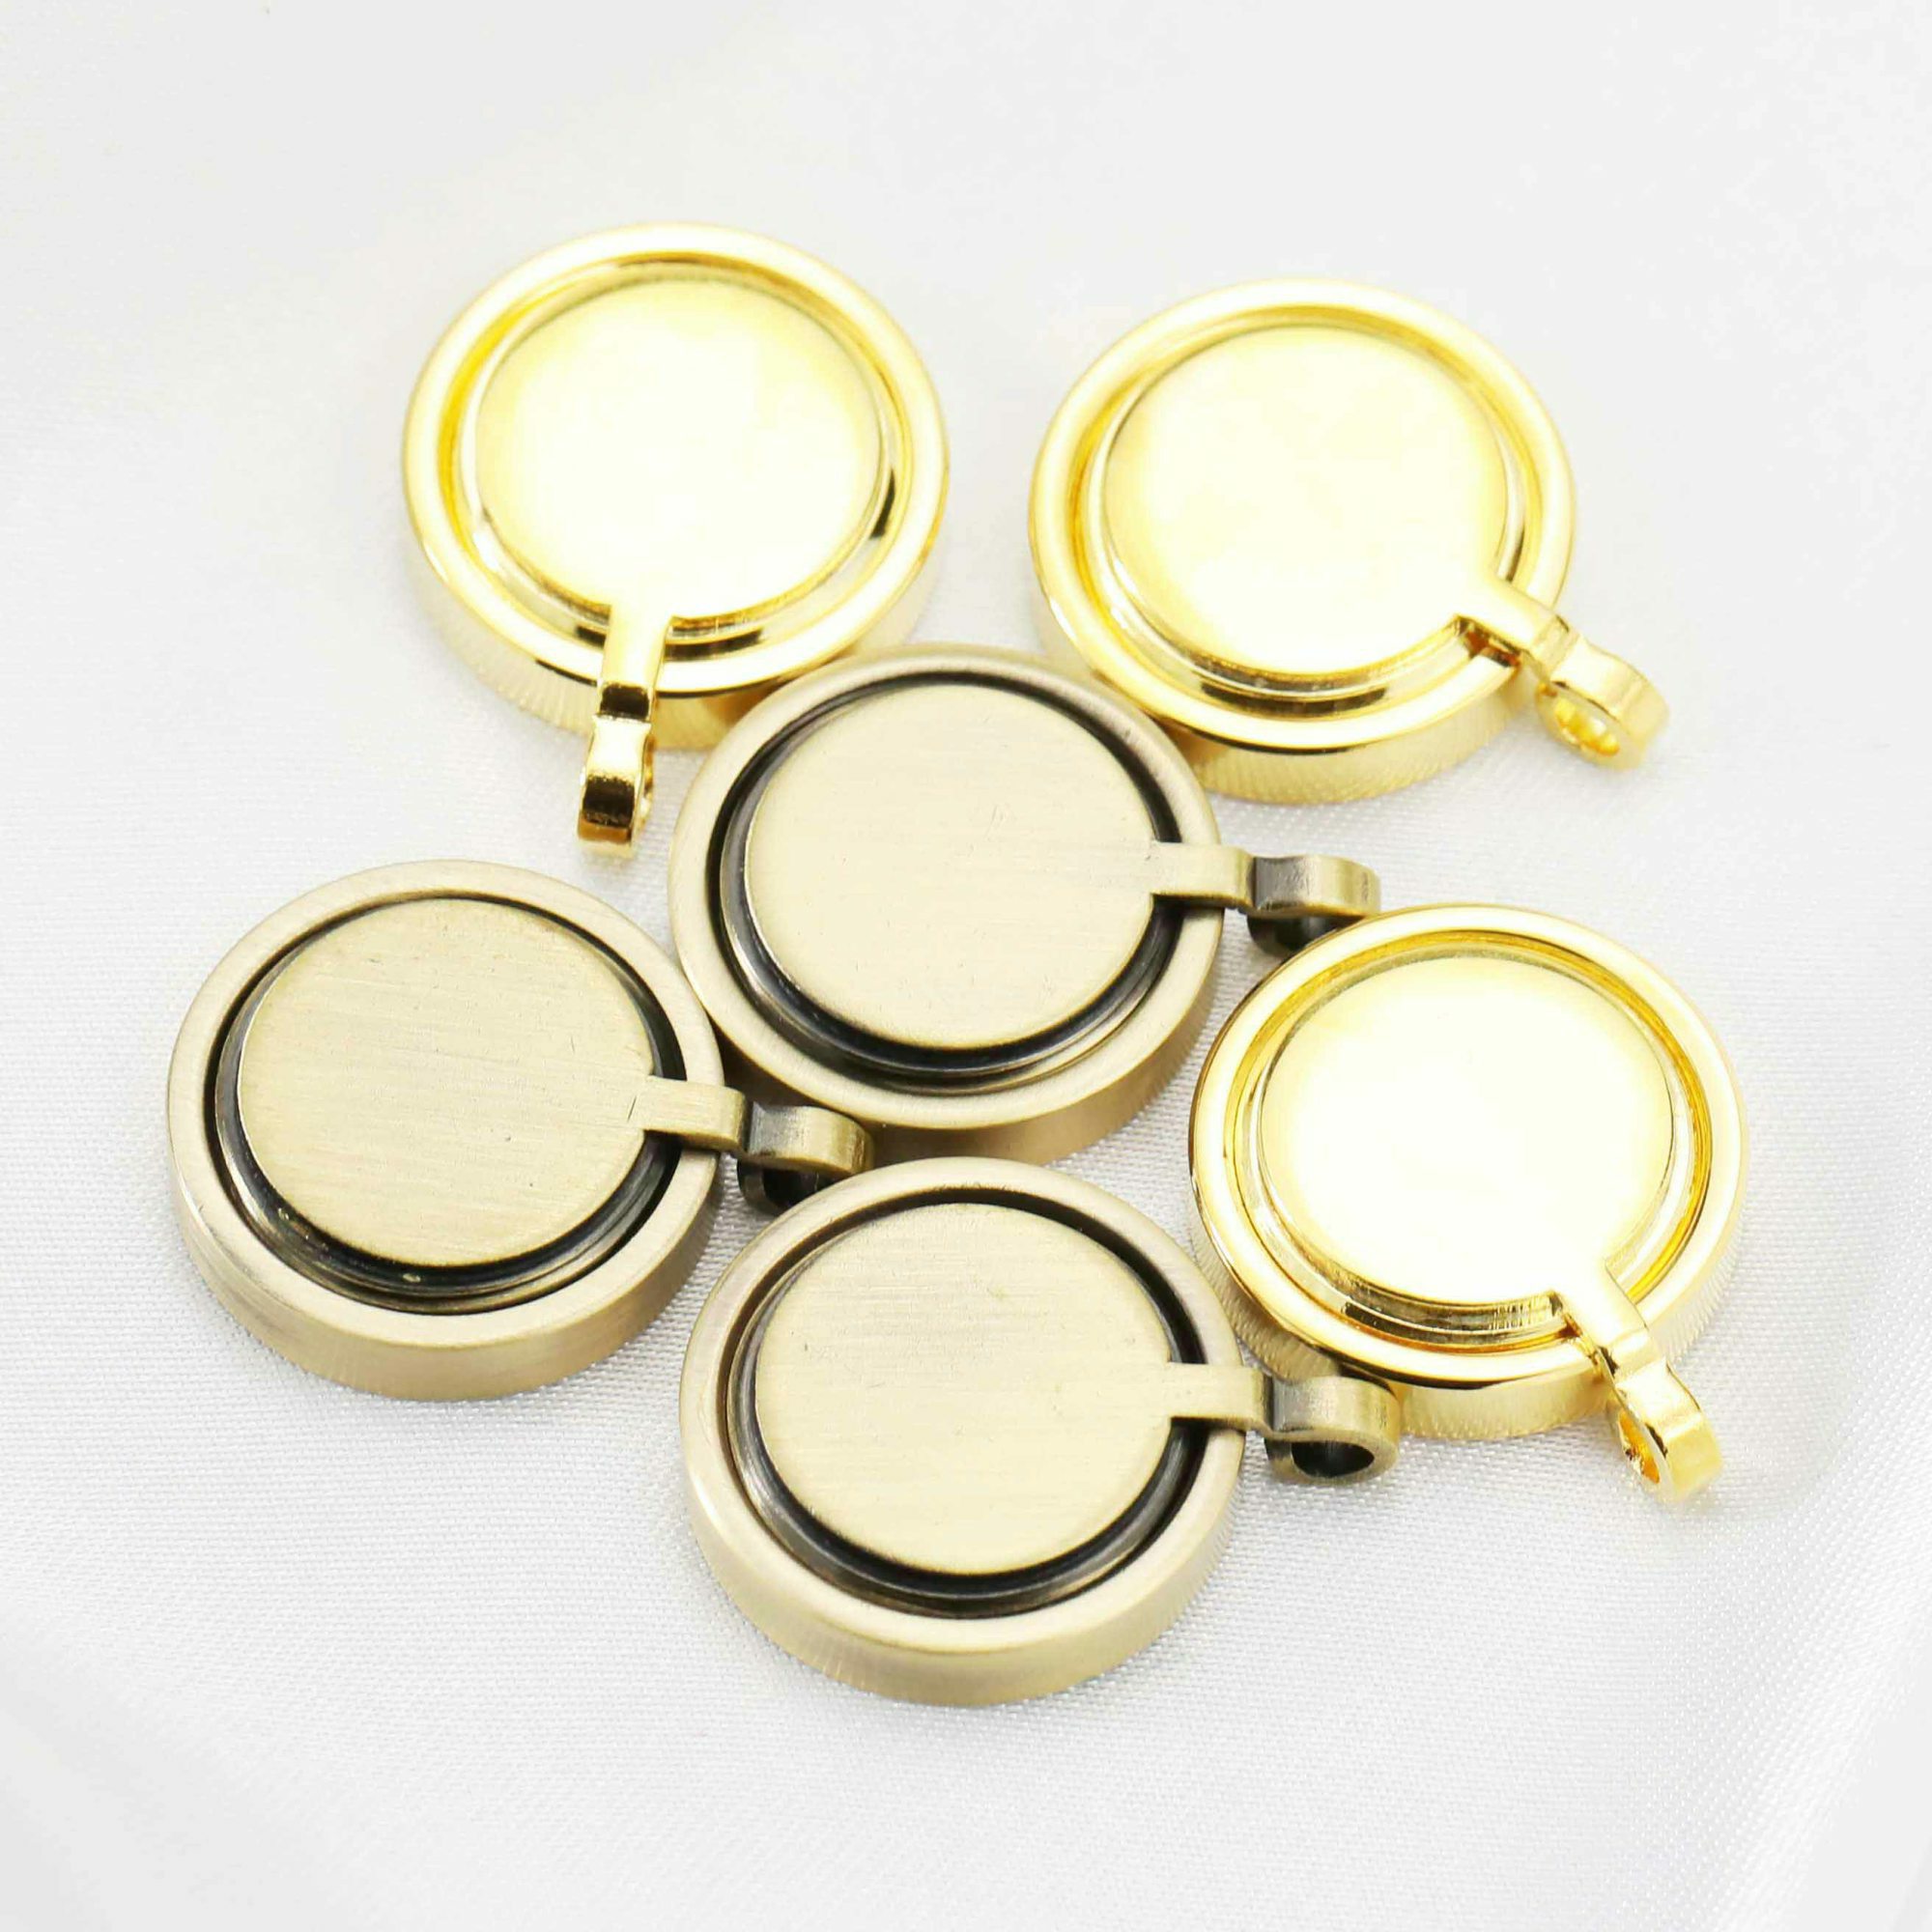 10Pcs 14mm Round Brass Gold and Shiny Bronze Antiqued Photo Pendant Settings DIY Locket Charm Jewelry Supplies 1500161 - Click Image to Close